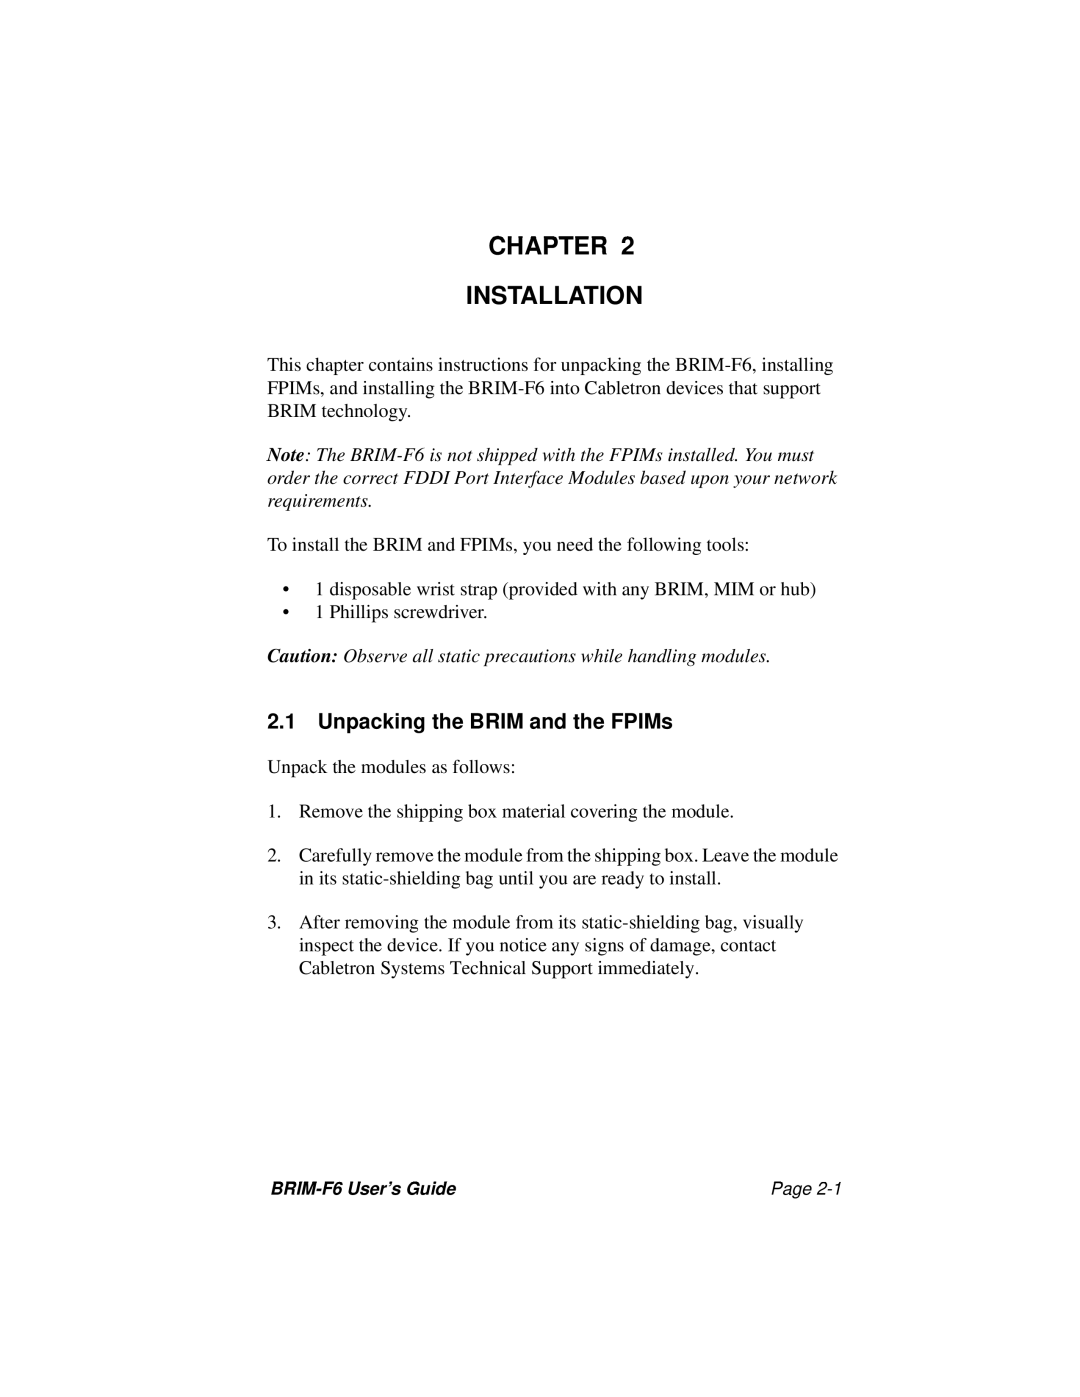 Cabletron Systems BRIM-F6 manual Chapter Installation, Unpacking the BRIM and the FPIMs 